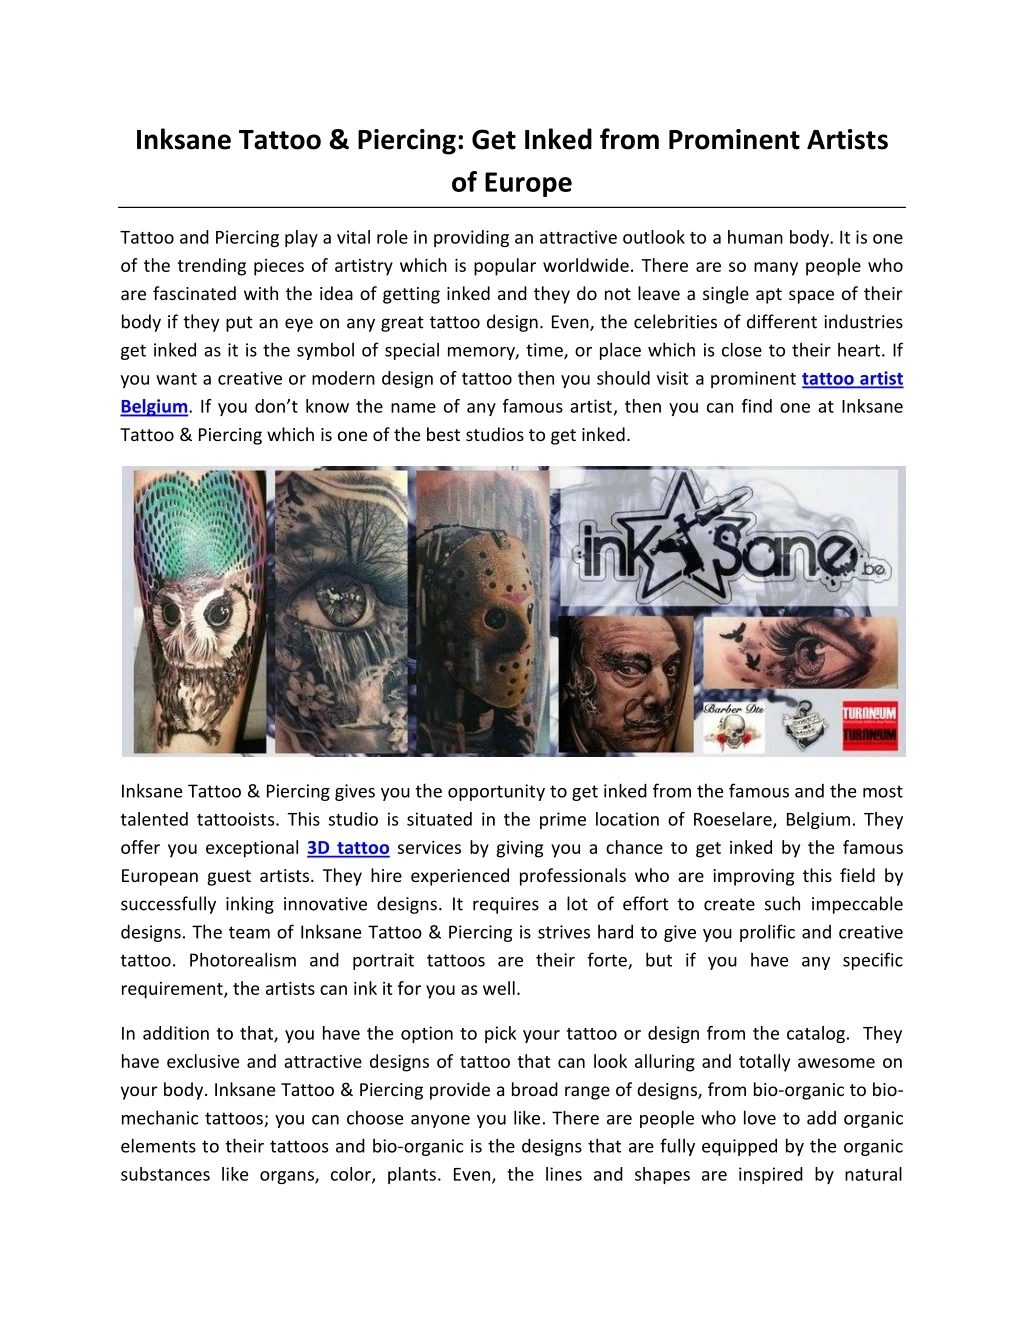 inksane tattoo piercing get inked from prominent